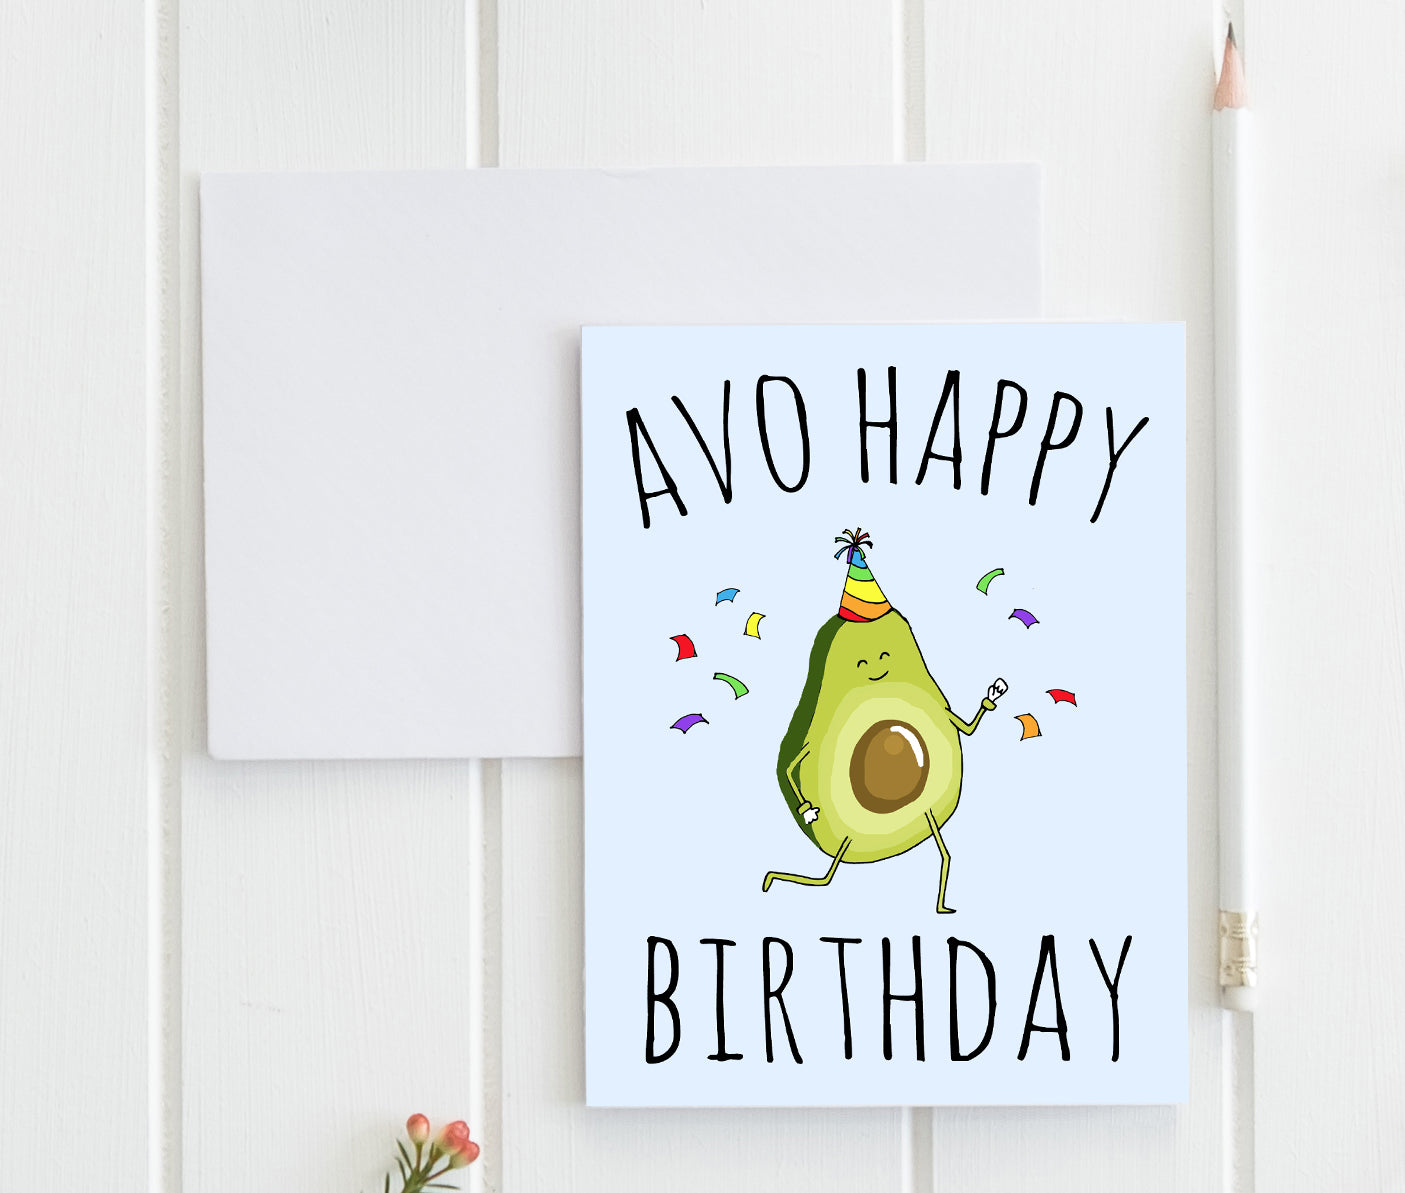 a birthday card with an avocado wearing a party hat